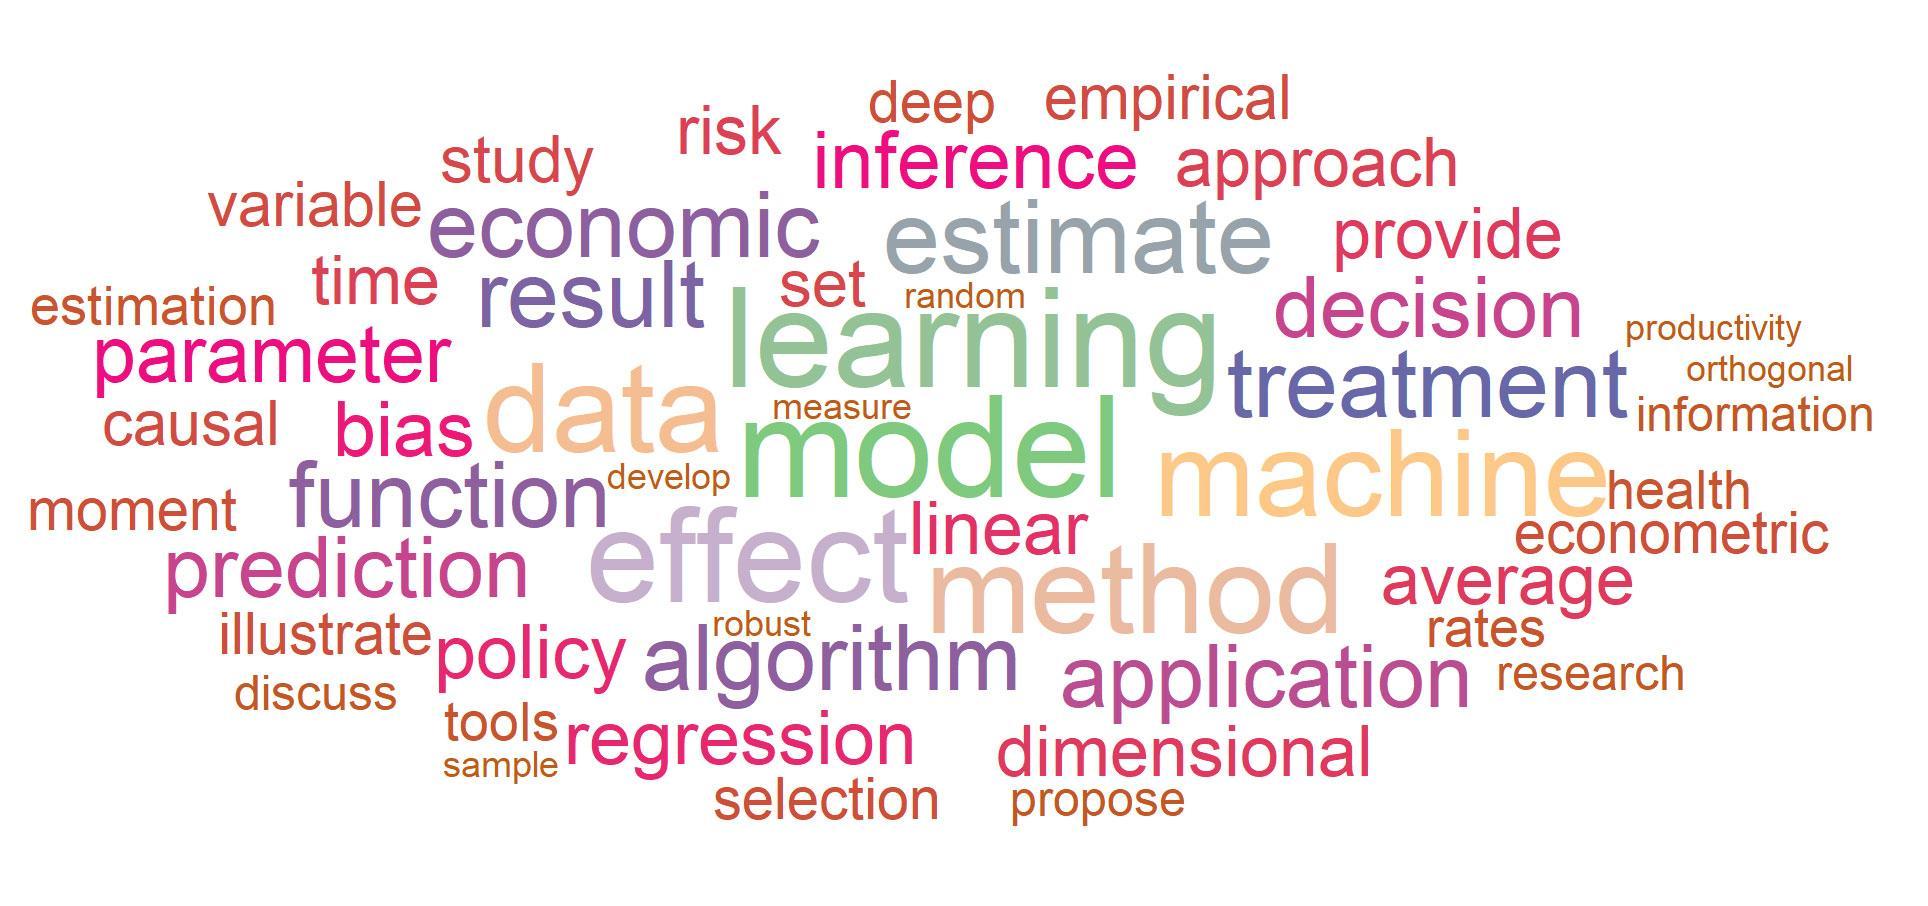 Word cloud with the following words in order of prominence: model, learning; effect; method; data, machine; estimate; treatment; economic, result, function, algorithm; inference, parameter, bias; decision, application, prediction; approach, provide, average, dimensional, policy, regression, linear, average; provide, approach, empirical, risk, study, variable, time, causal, moment, illustrate, set; selection, tools, econometric; health, rates; research, propose, discuss; sample, robust, develop, measure, random, productivity, orthogonal.